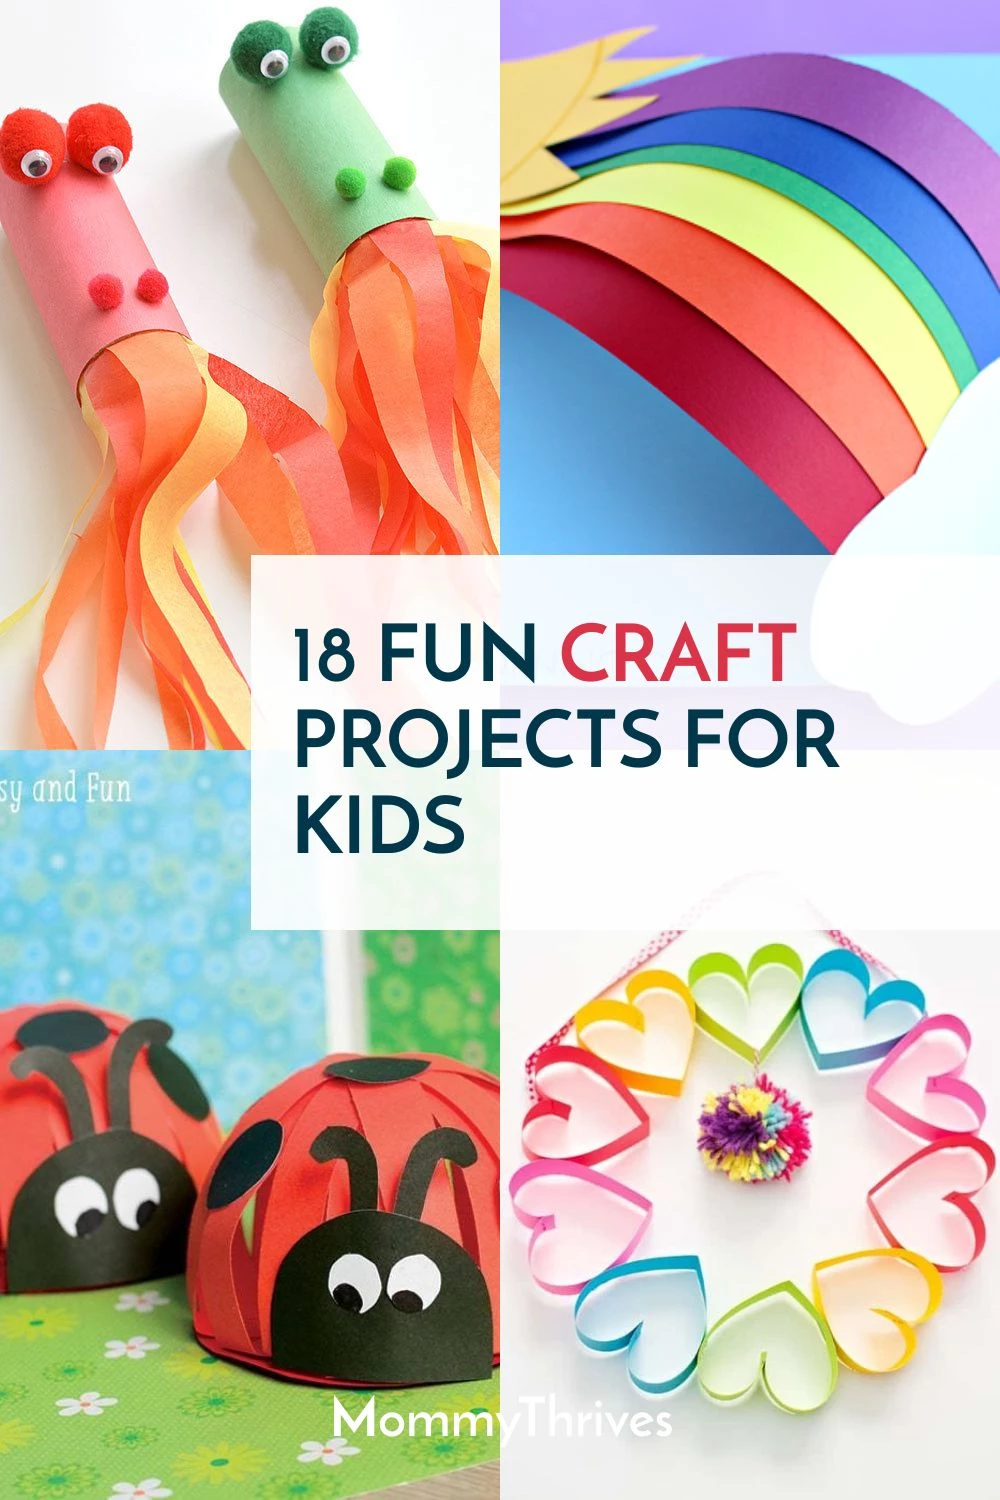 Cool DIY Projects: 10 Fun Craft Ideas for Kids - Craft projects for every  fan!